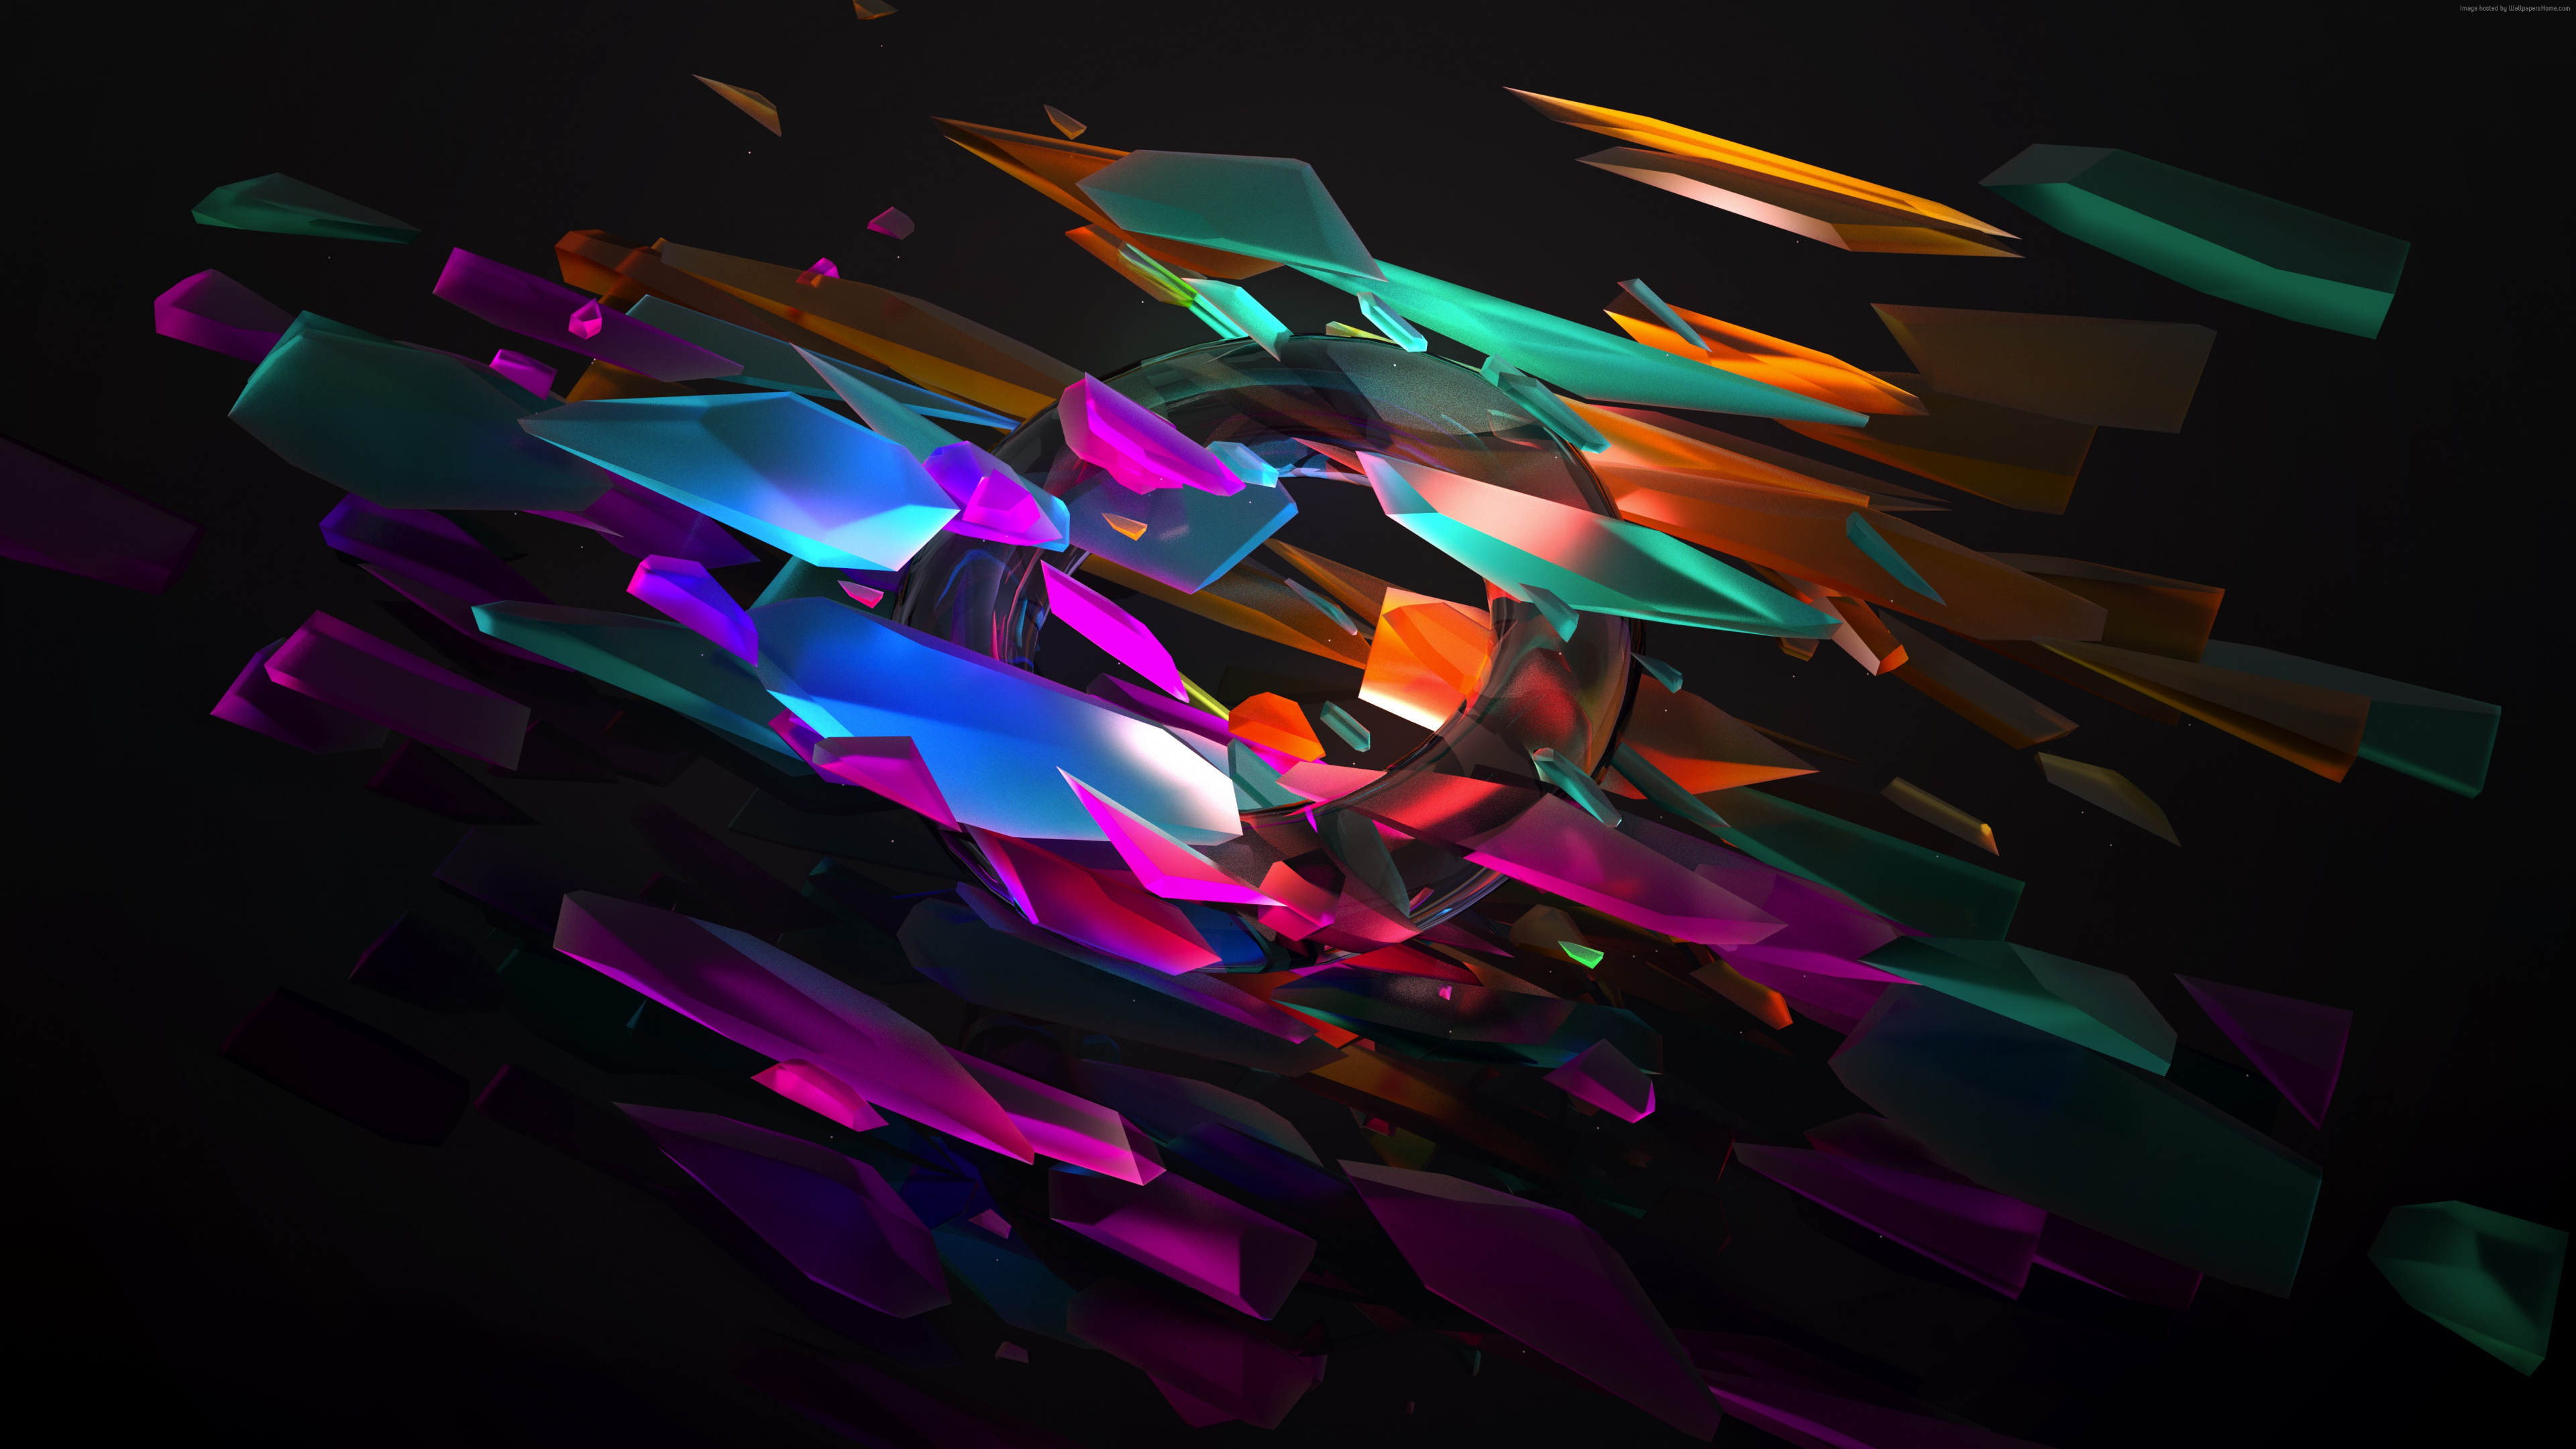 Purple Orange and Blue Abstract Art. Wallpaper in 3840x2160 Resolution